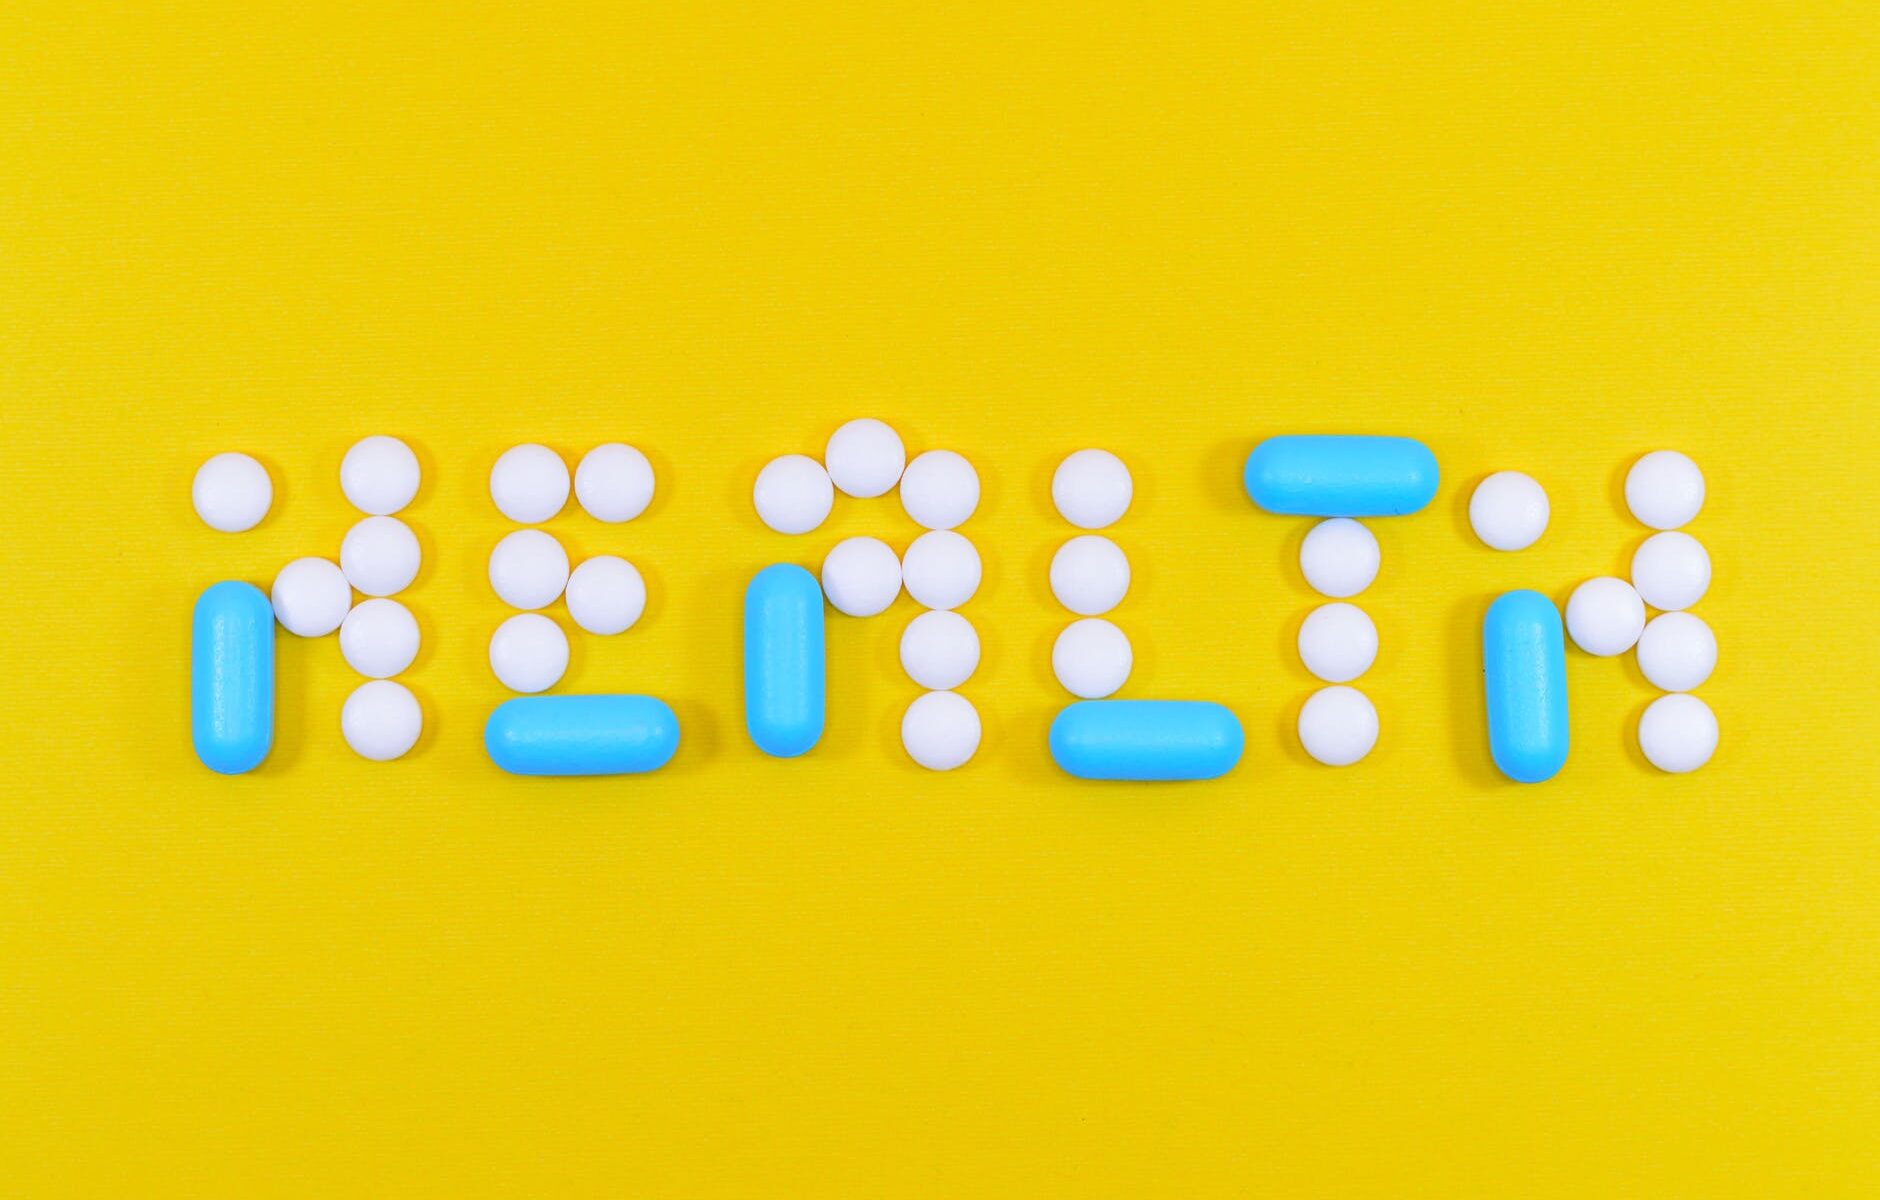 white and blue health pill and tablet letter cutout on yellow surface